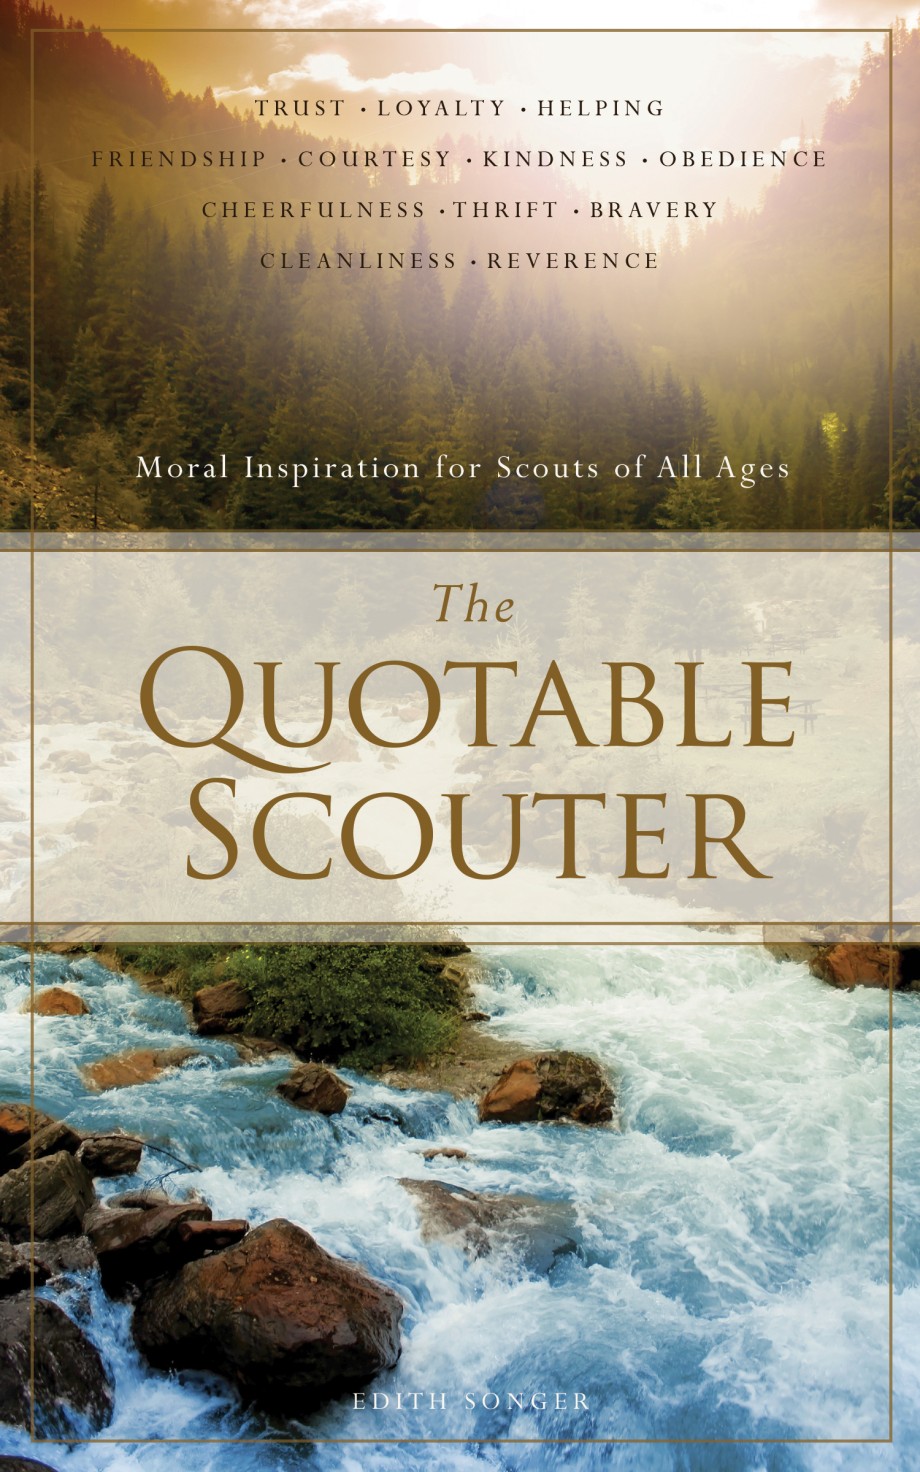 Quotable Scouter Moral Inspiration for Scouts of All Ages